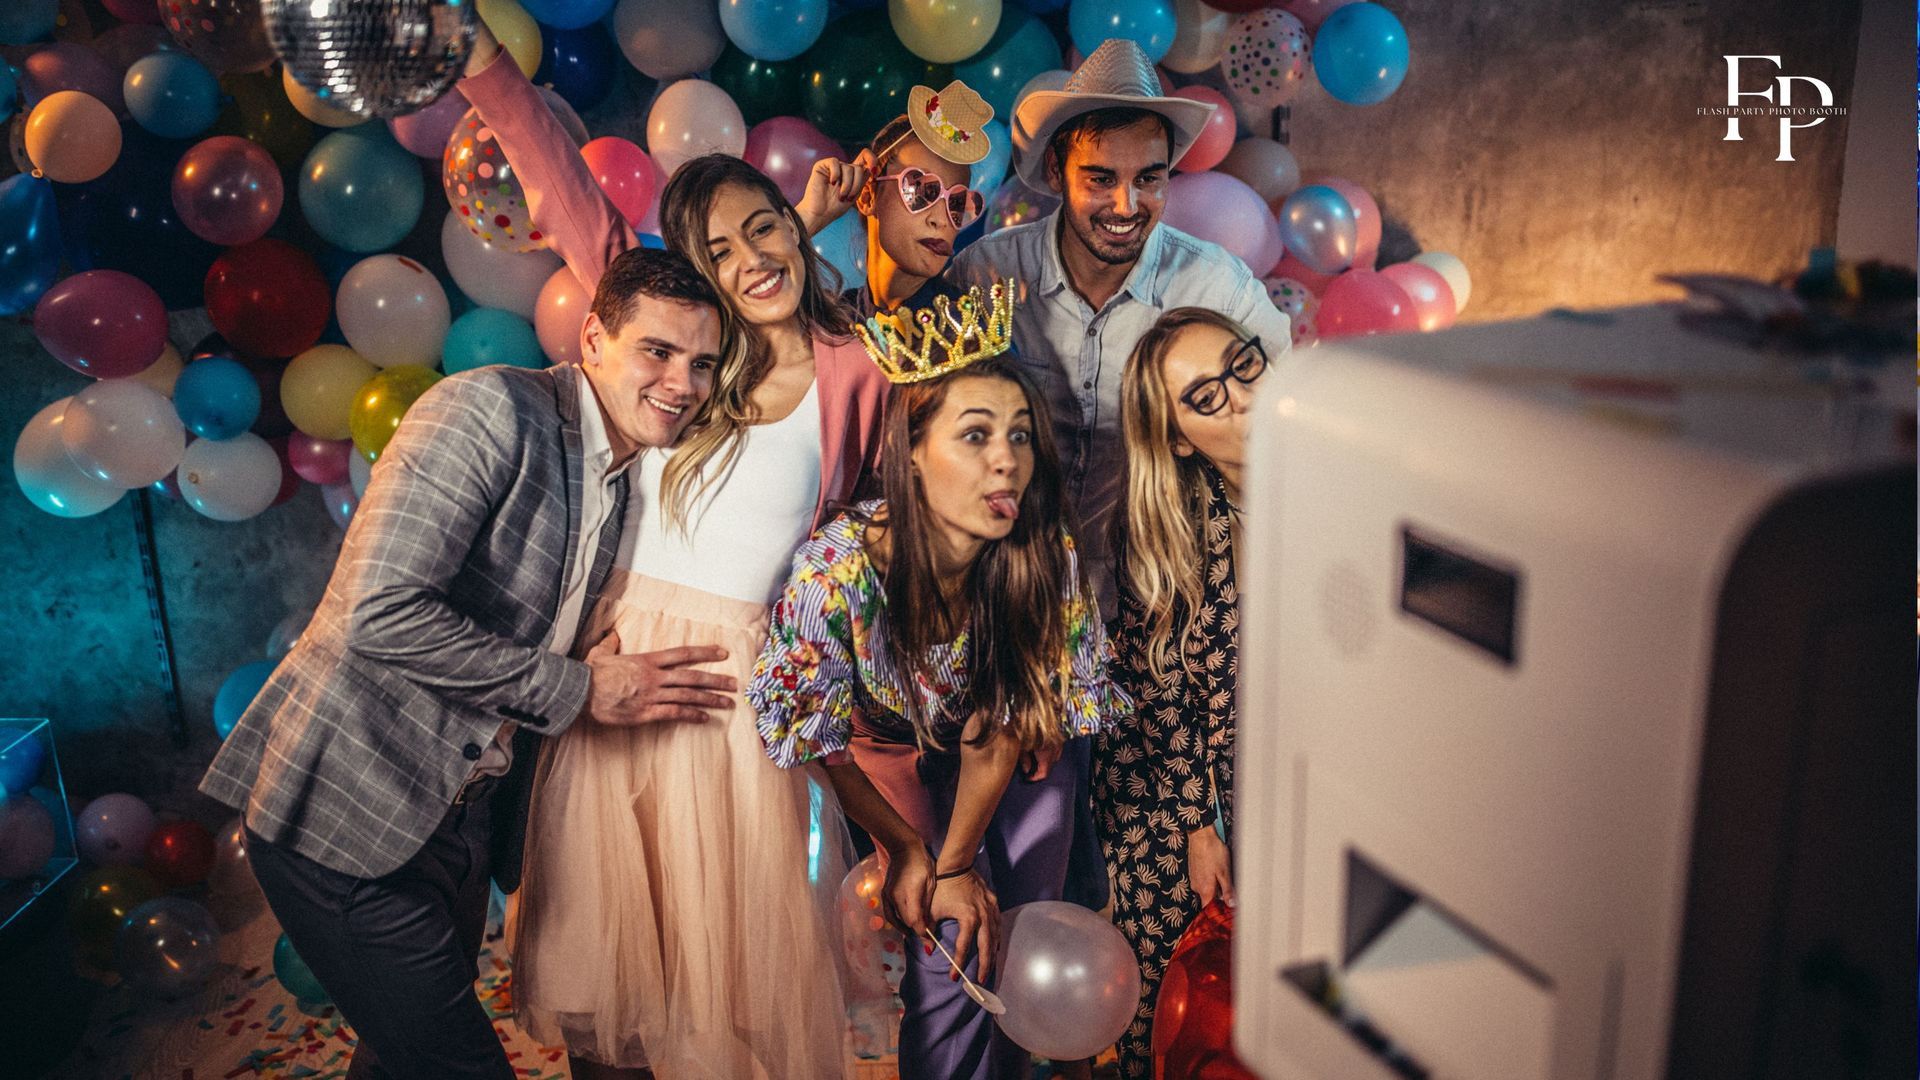 San Antonio friends celebrate a special occasion with laughter and props in the photo booth.